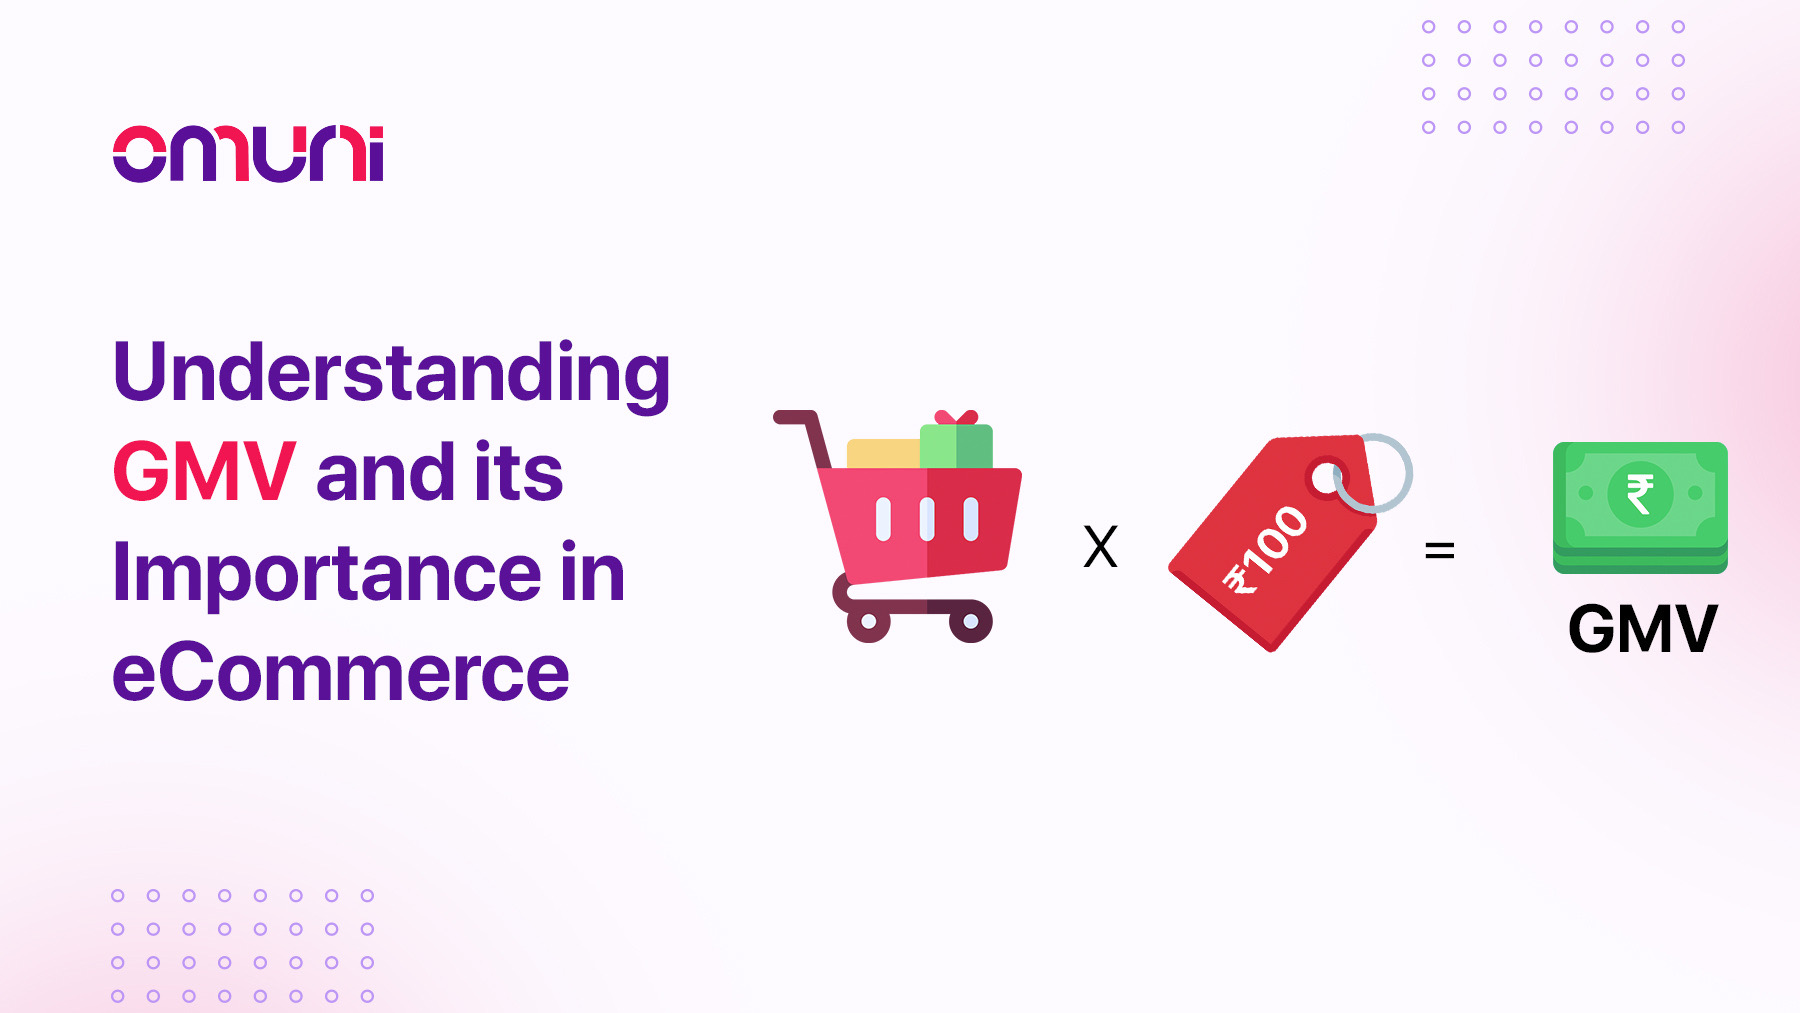 Understanding GMV and its Importance in eCommerce